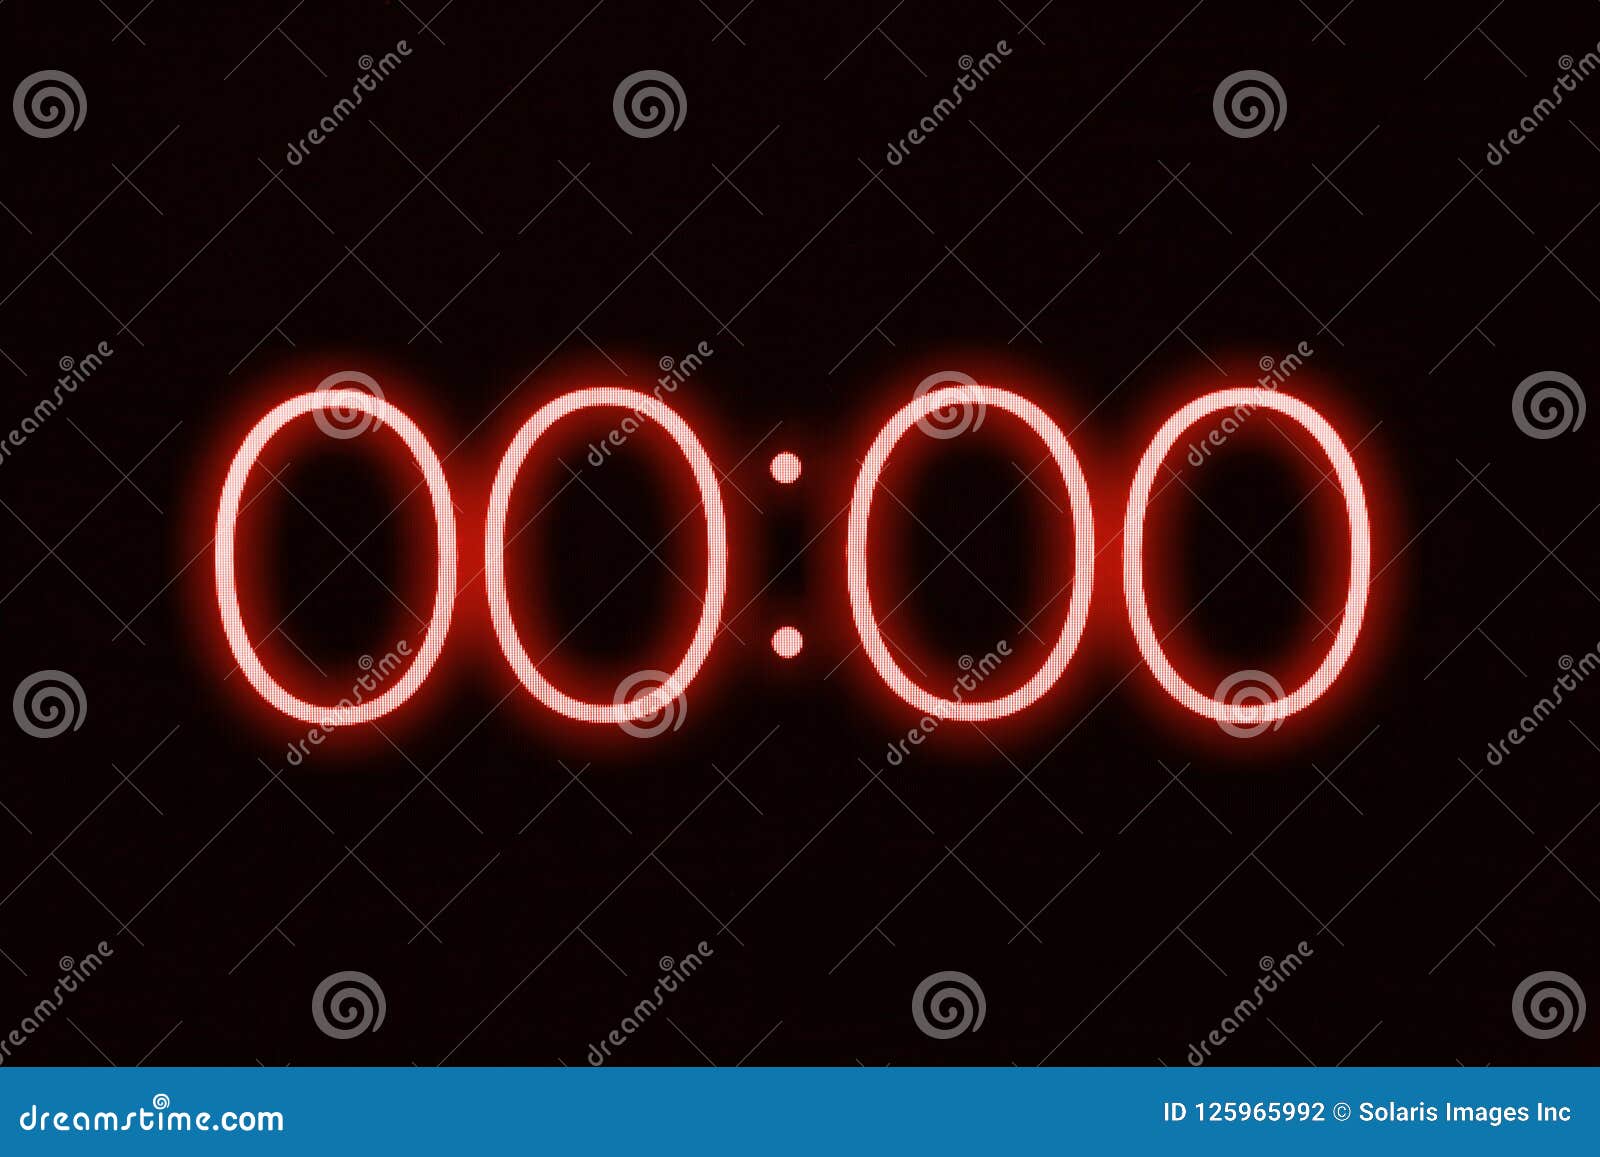 digital clock timer stopwatch display showing 0 zero seconds. emergency, stress, out of time concept.